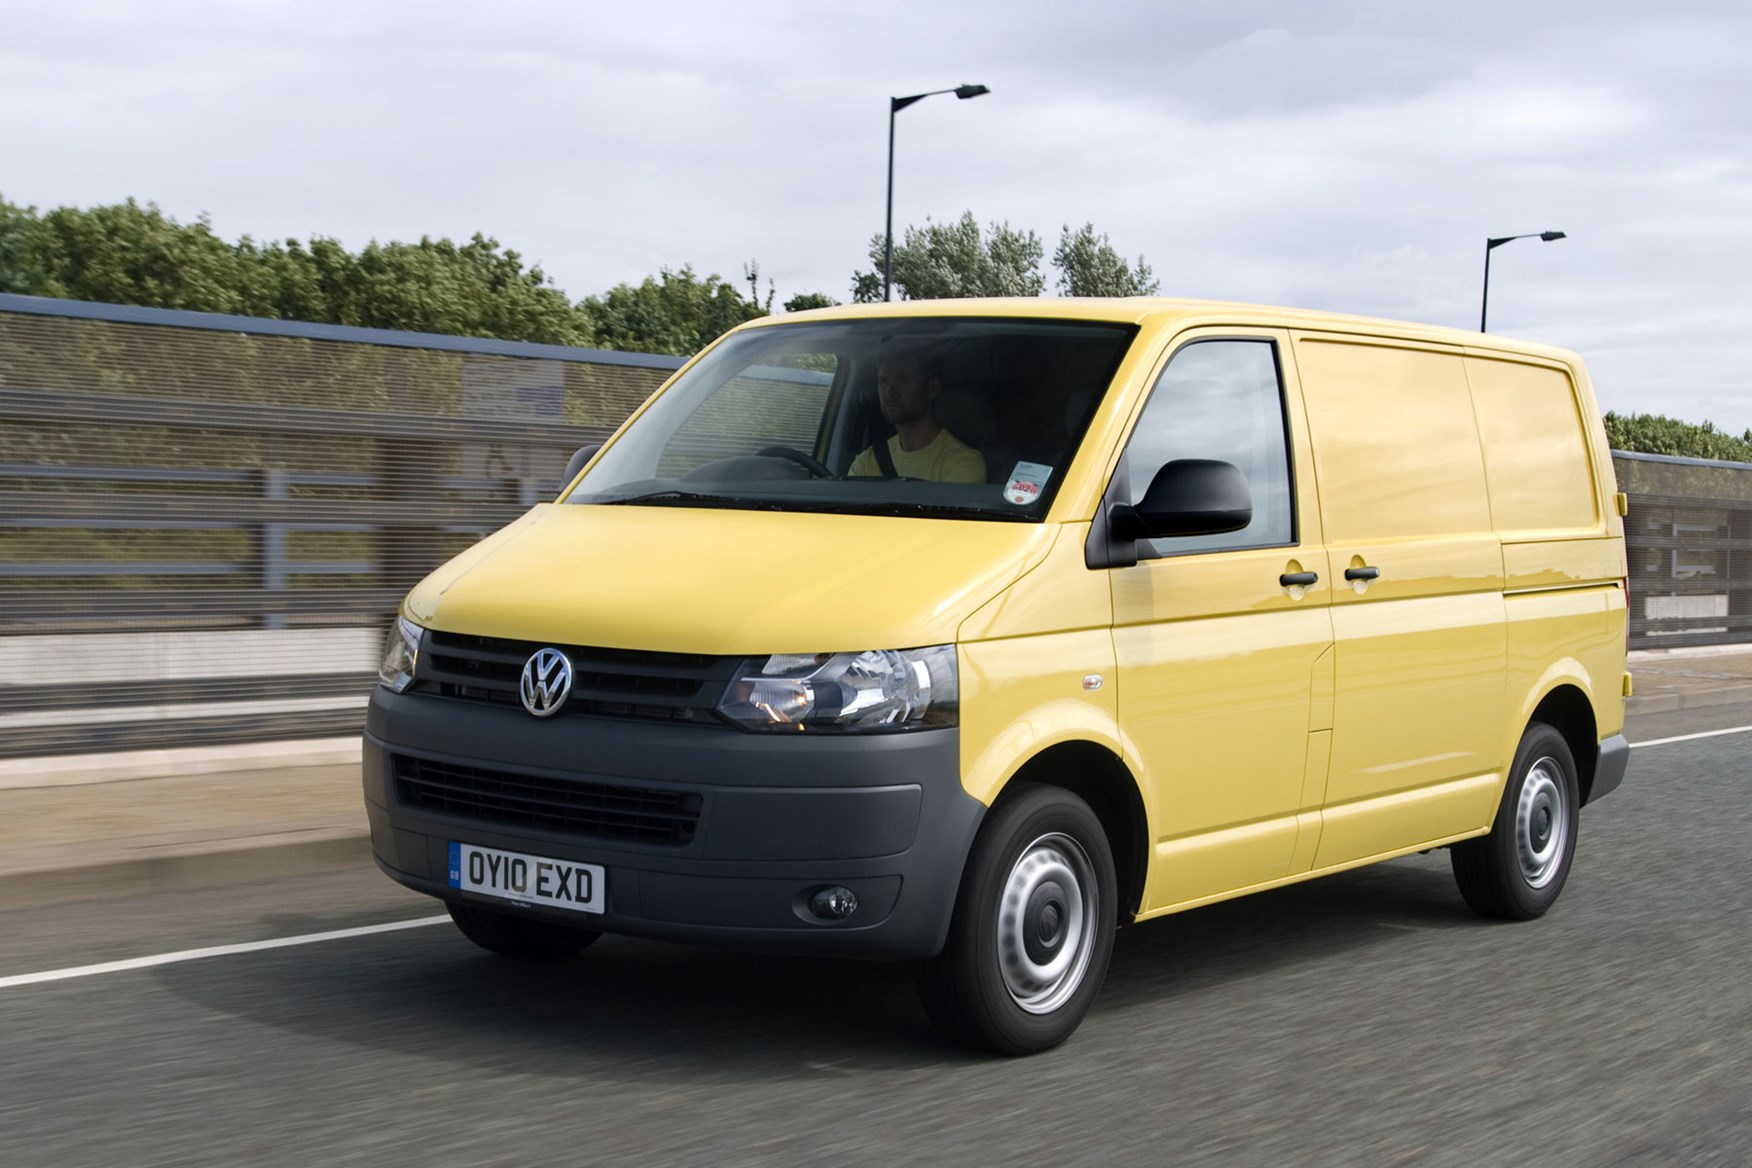 VW Transporter T5 (2010-2015) front view driving